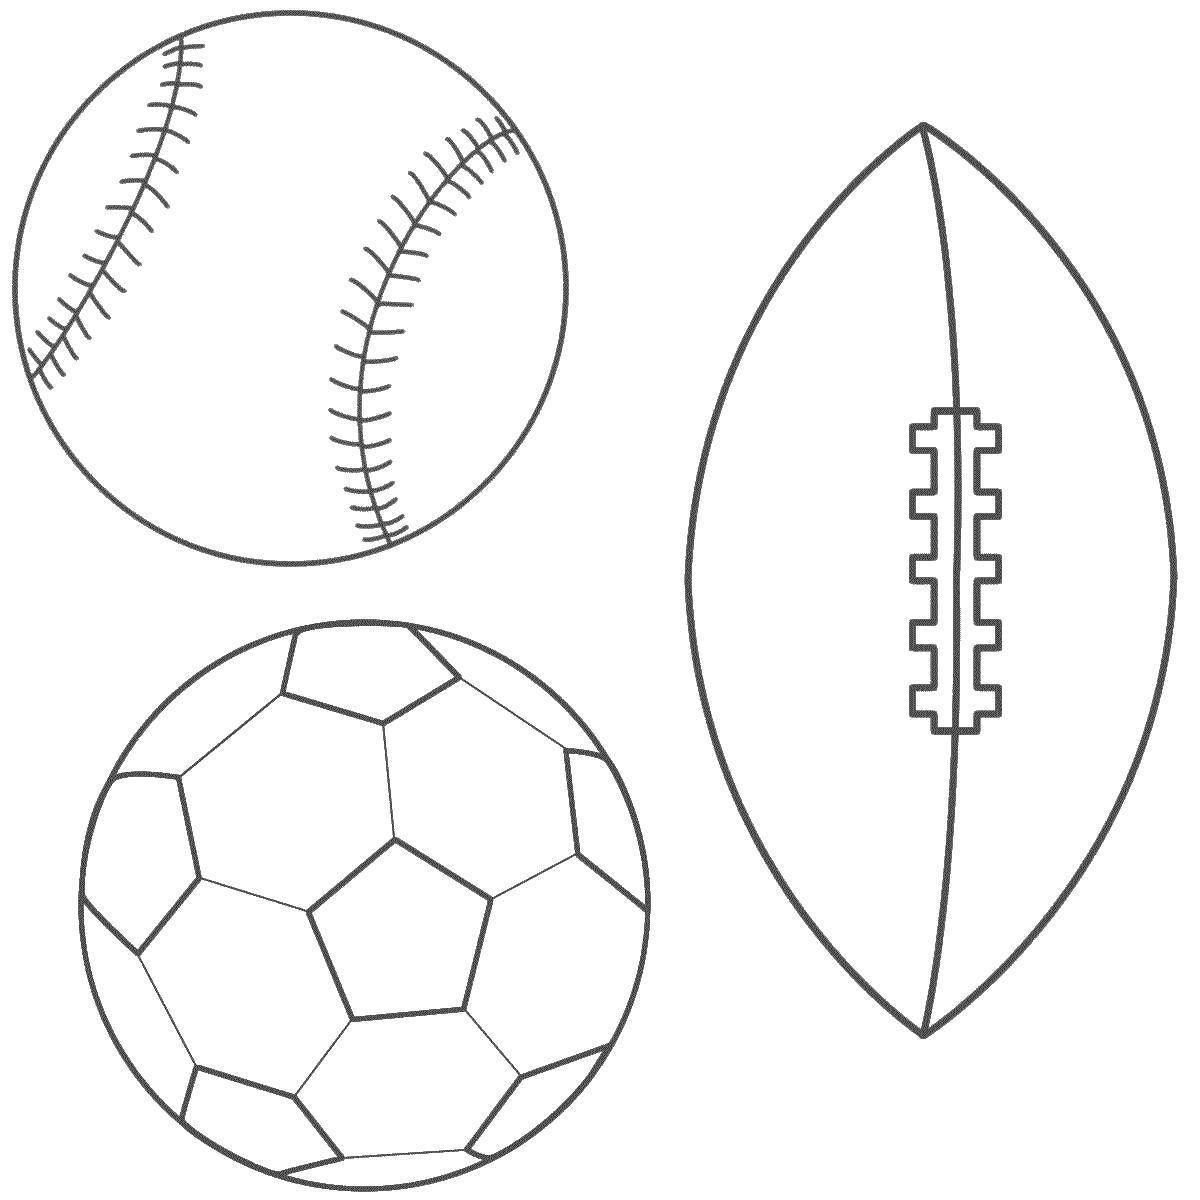 Coloring Balls. Category Sports. Tags:  Sports, ball.